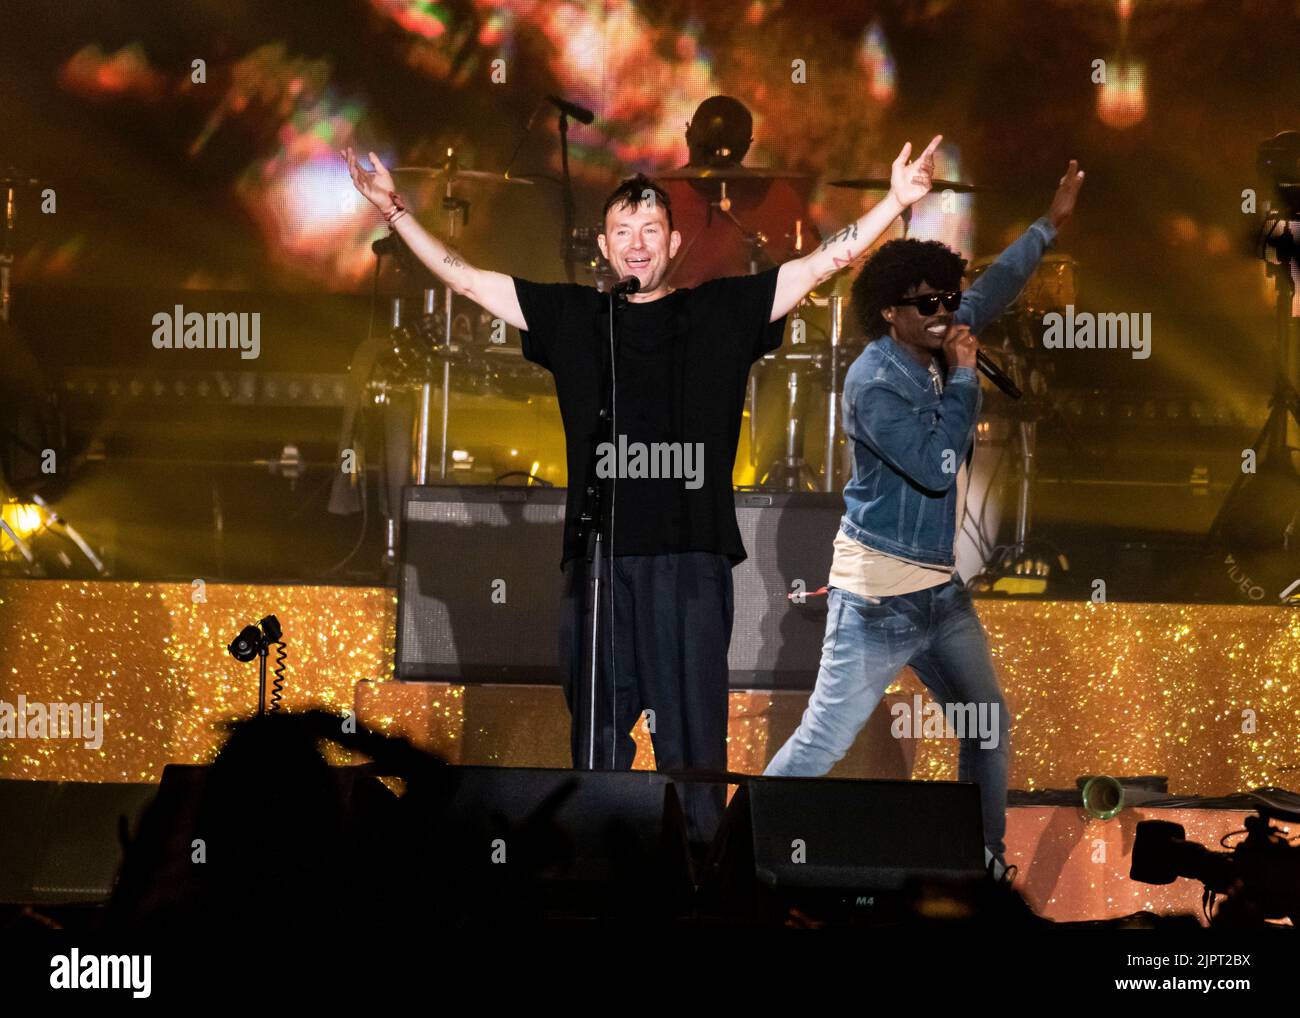 London, UK, Friday, 19th August 2022. Damon Albarn from Gorillaz performs live on stage as part of the All Points East Festival, Victoria Park, London.  Credit: DavidJensen / Empics Entertainment / Alamy Live News Stock Photo